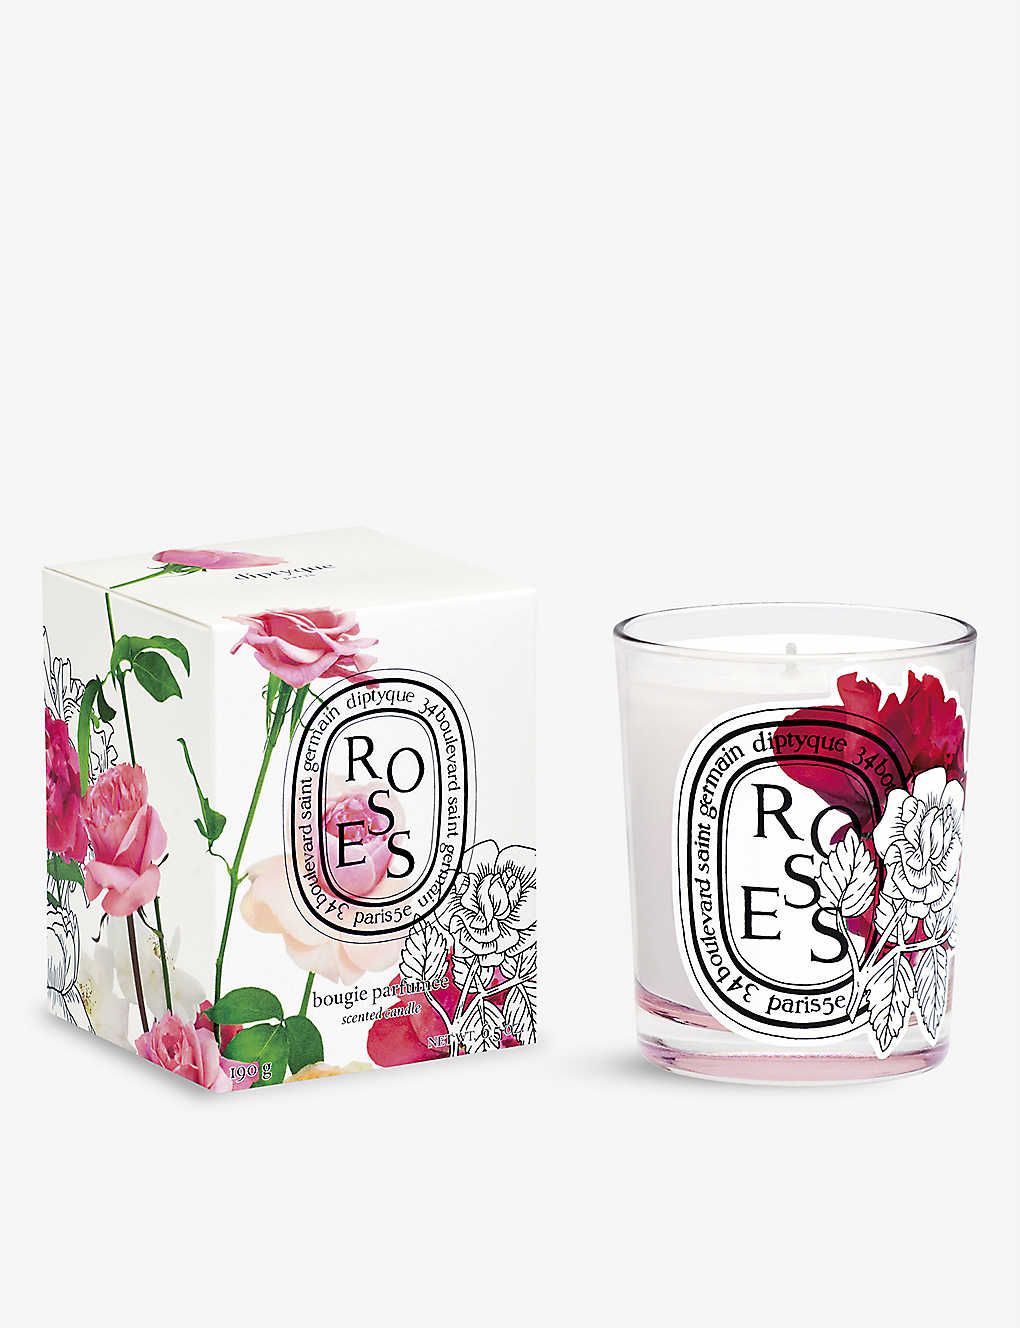 Roses limited-edition scented candle 190g | Selfridges